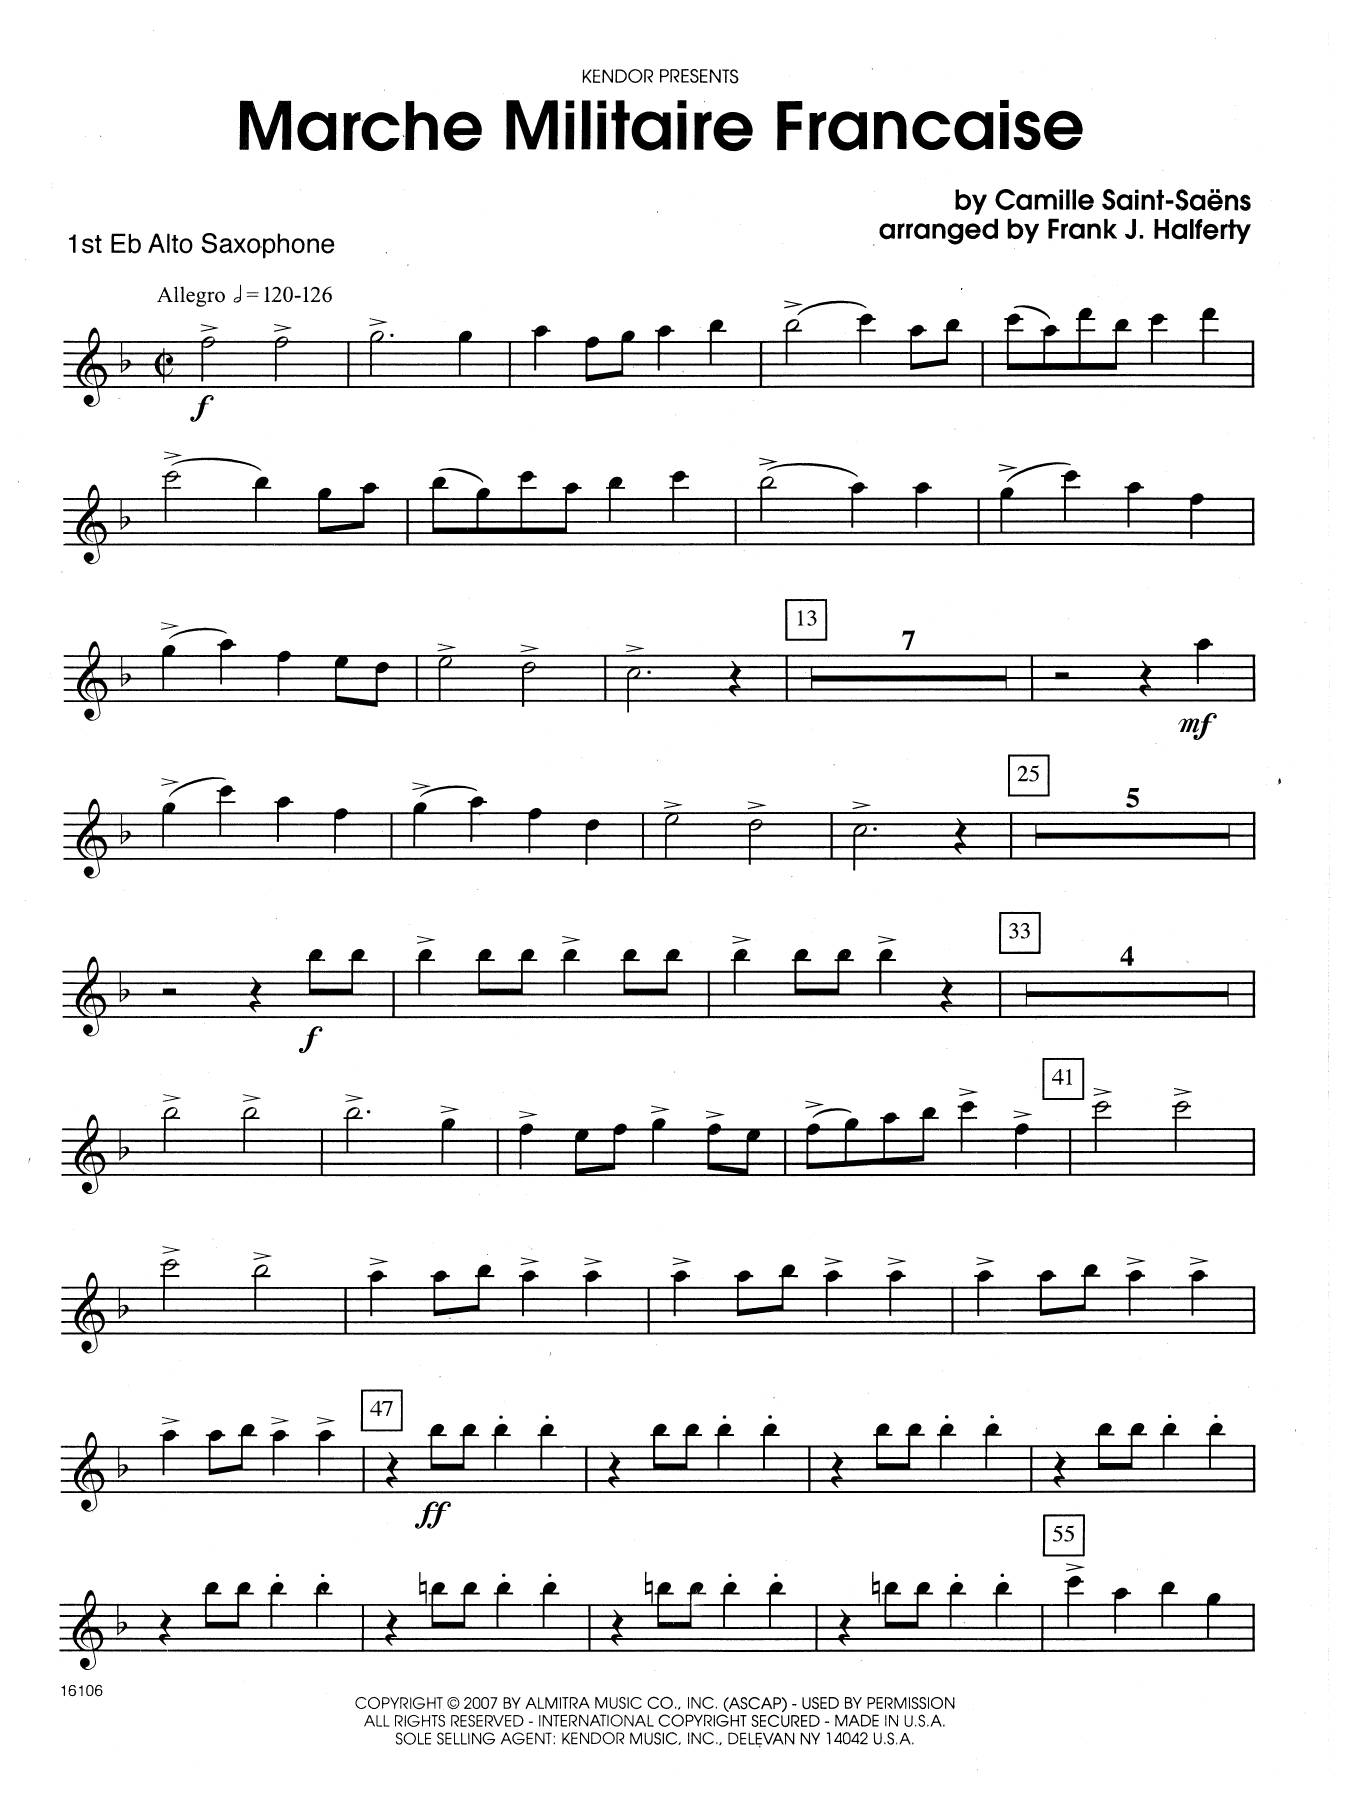 Frank J. Halferty Marche Militaire Francaise - 1st Eb Alto Saxophone sheet music notes and chords. Download Printable PDF.